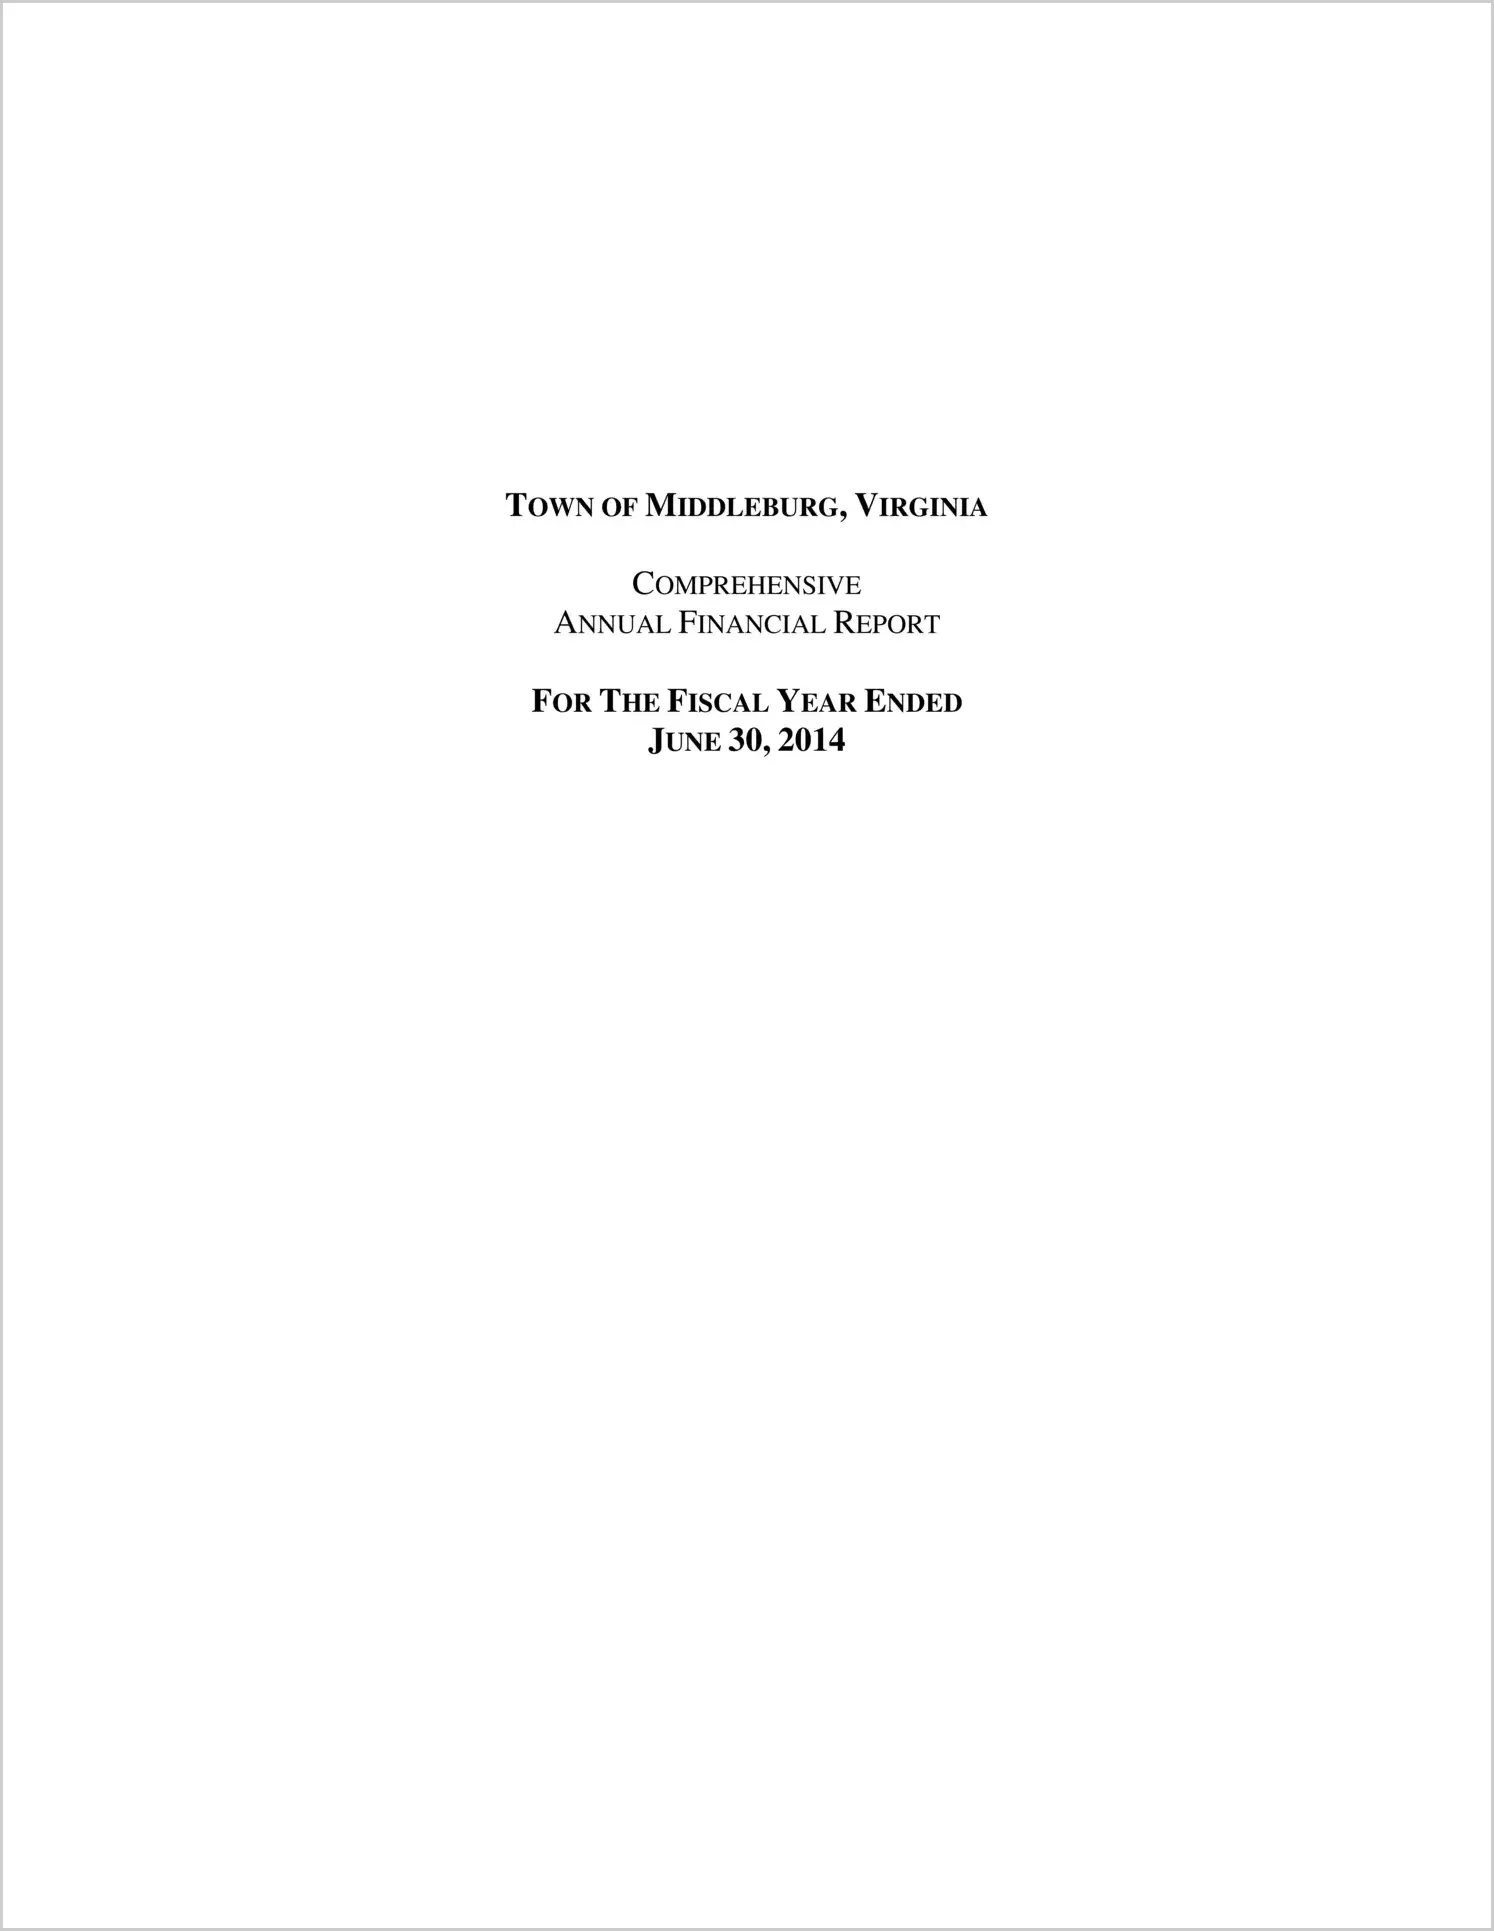 2014 Annual Financial Report for Town of Middleburg